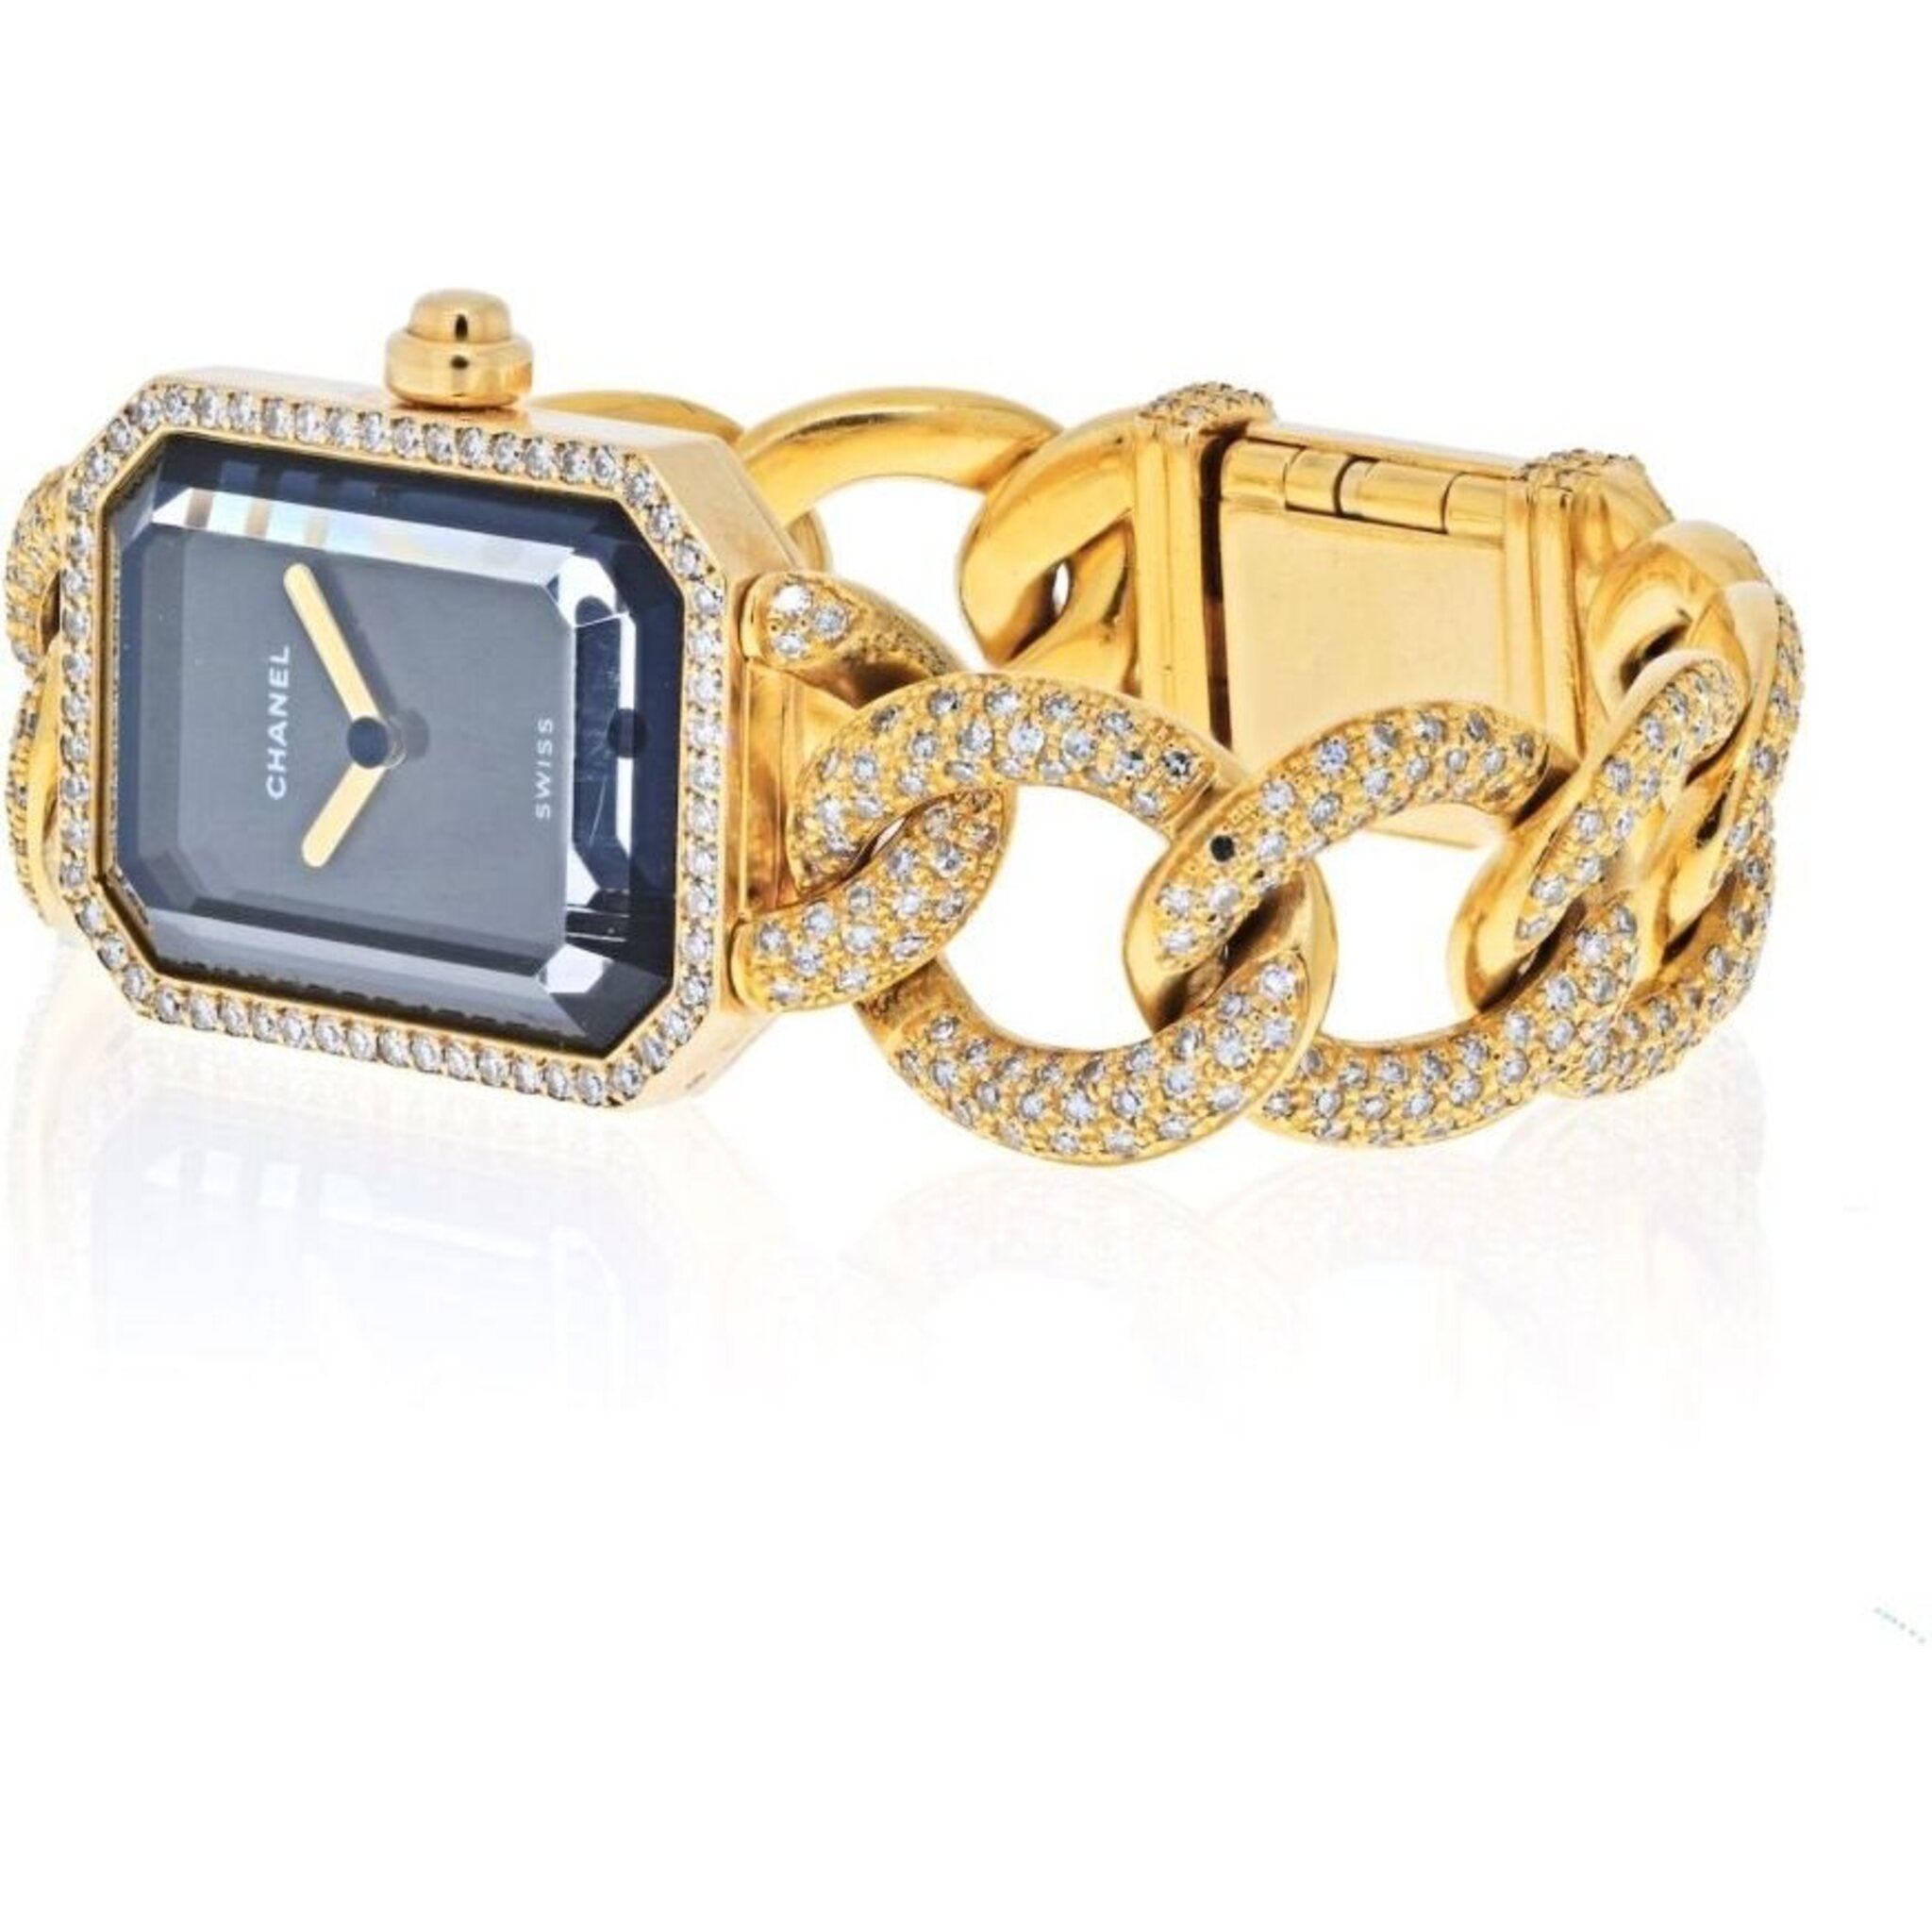 chanel 18k yellow gold premier diamond black dial watch watches chanel rr4018 2 6bc8aa4c 6119 476b aa9a a8a9afdcb814